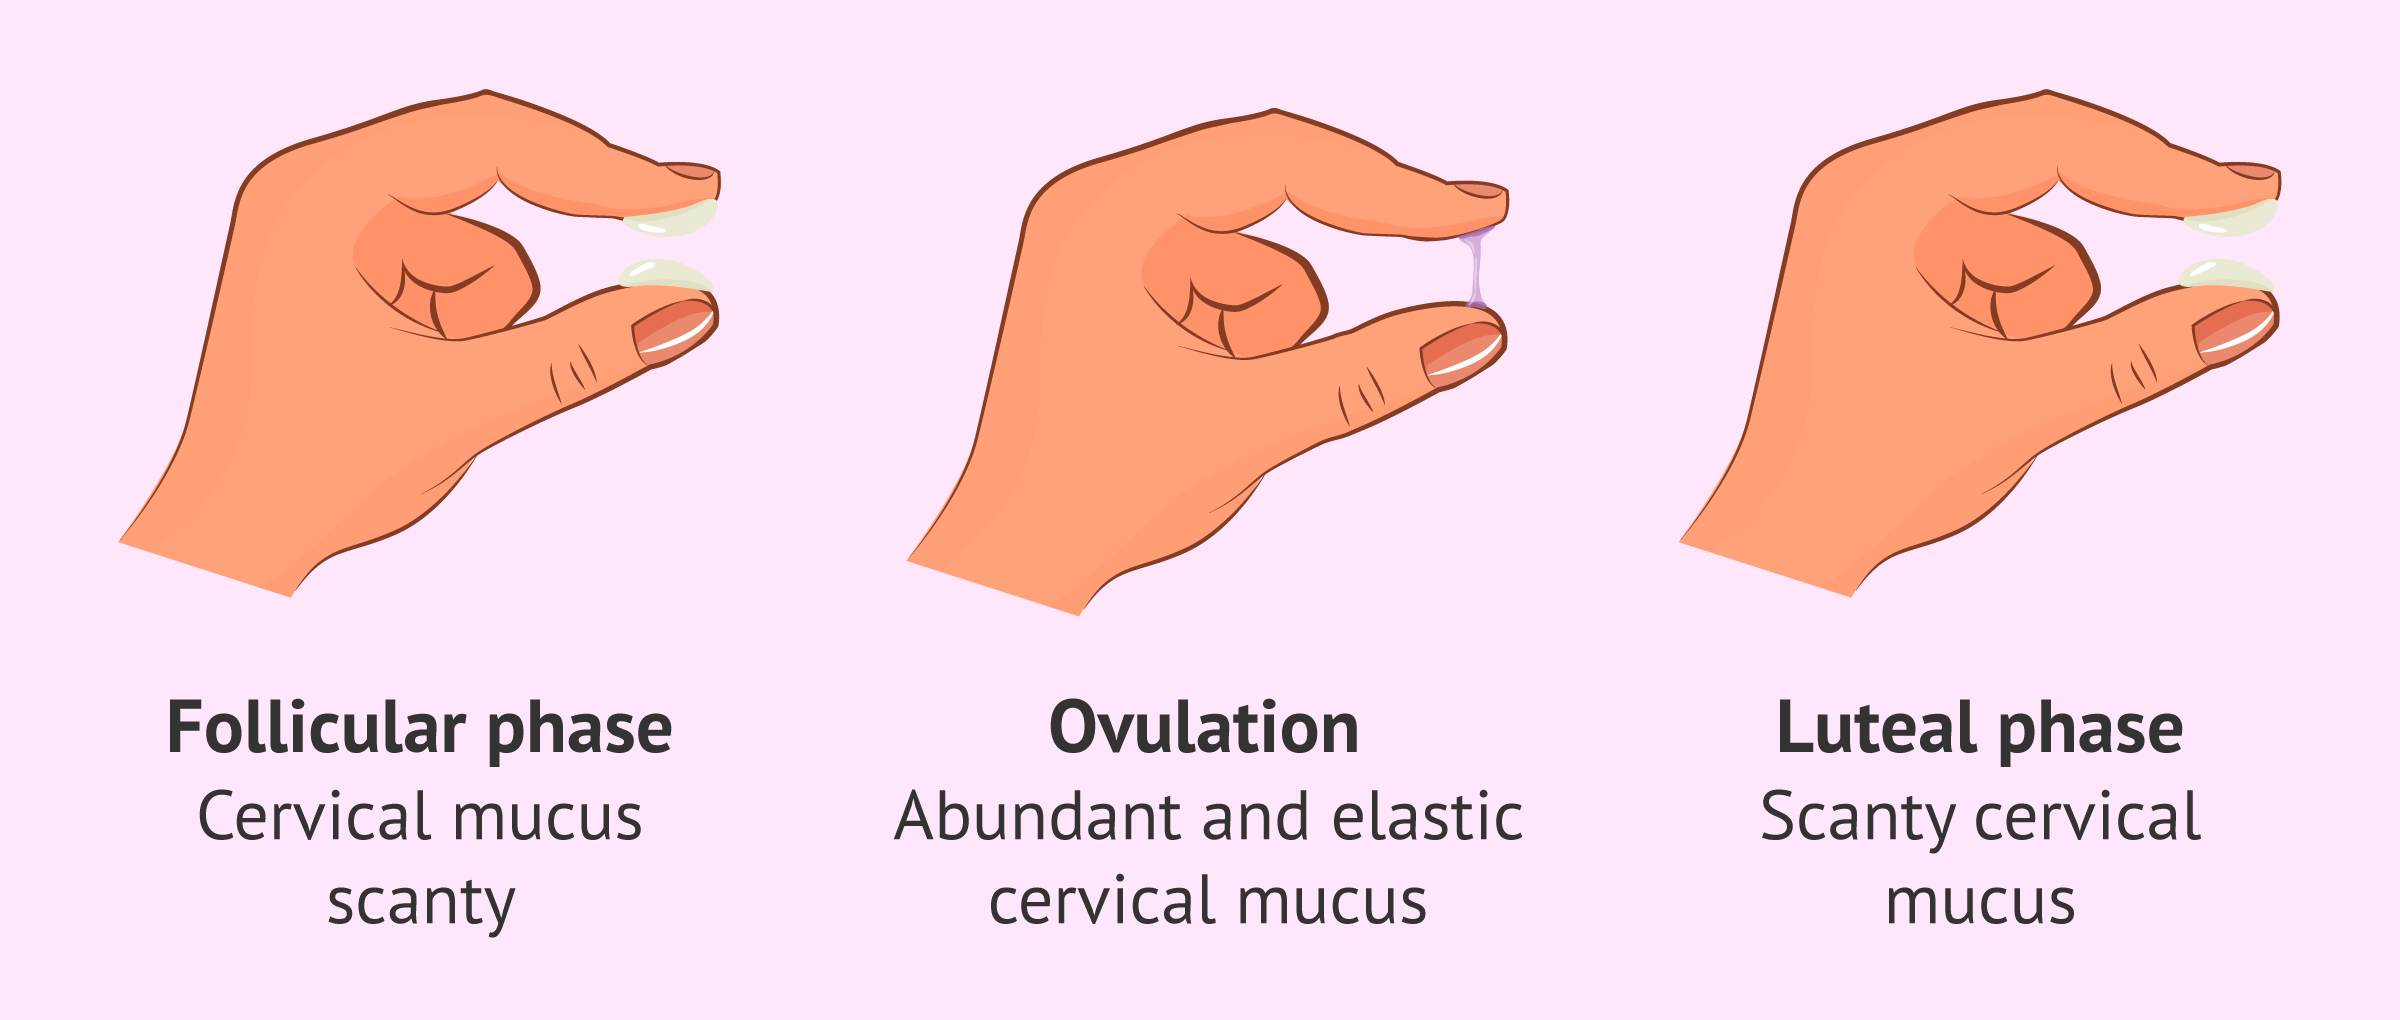 Normal variations of cervical mucus